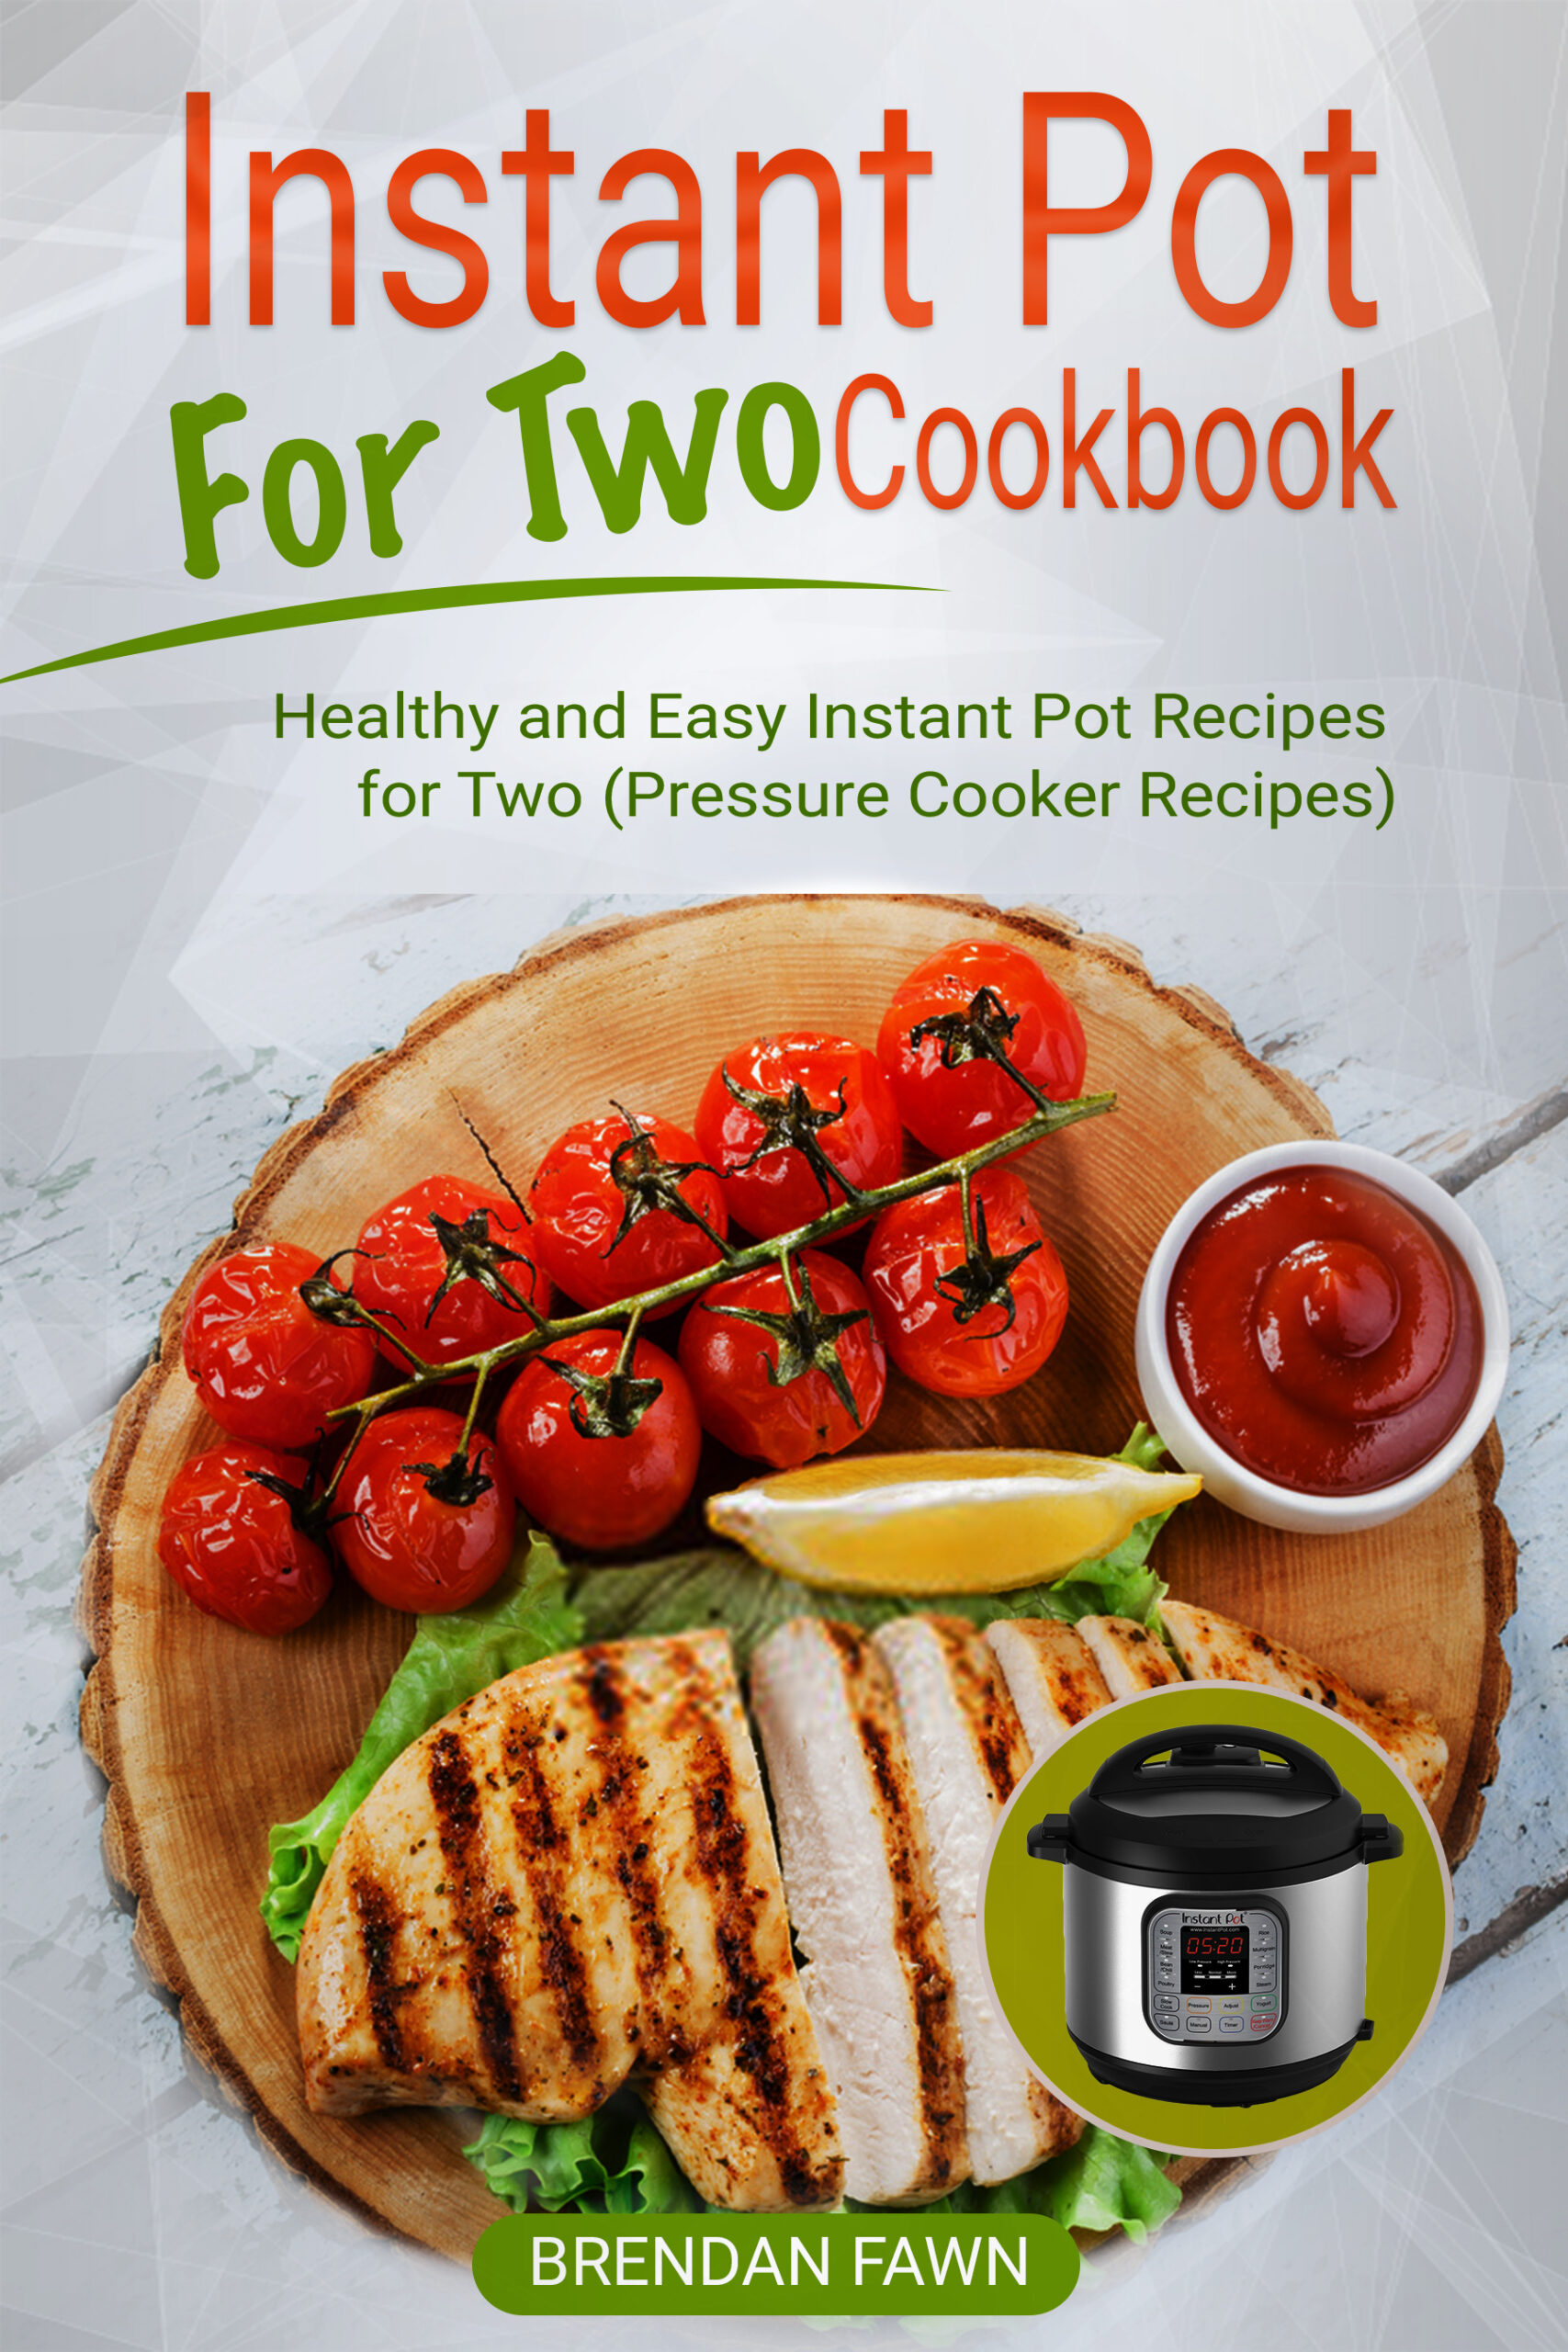 FREE: Instant Pot for Two Cookbook: Healthy and Easy Instant Pot Recipes for Two by Brendan Fawn